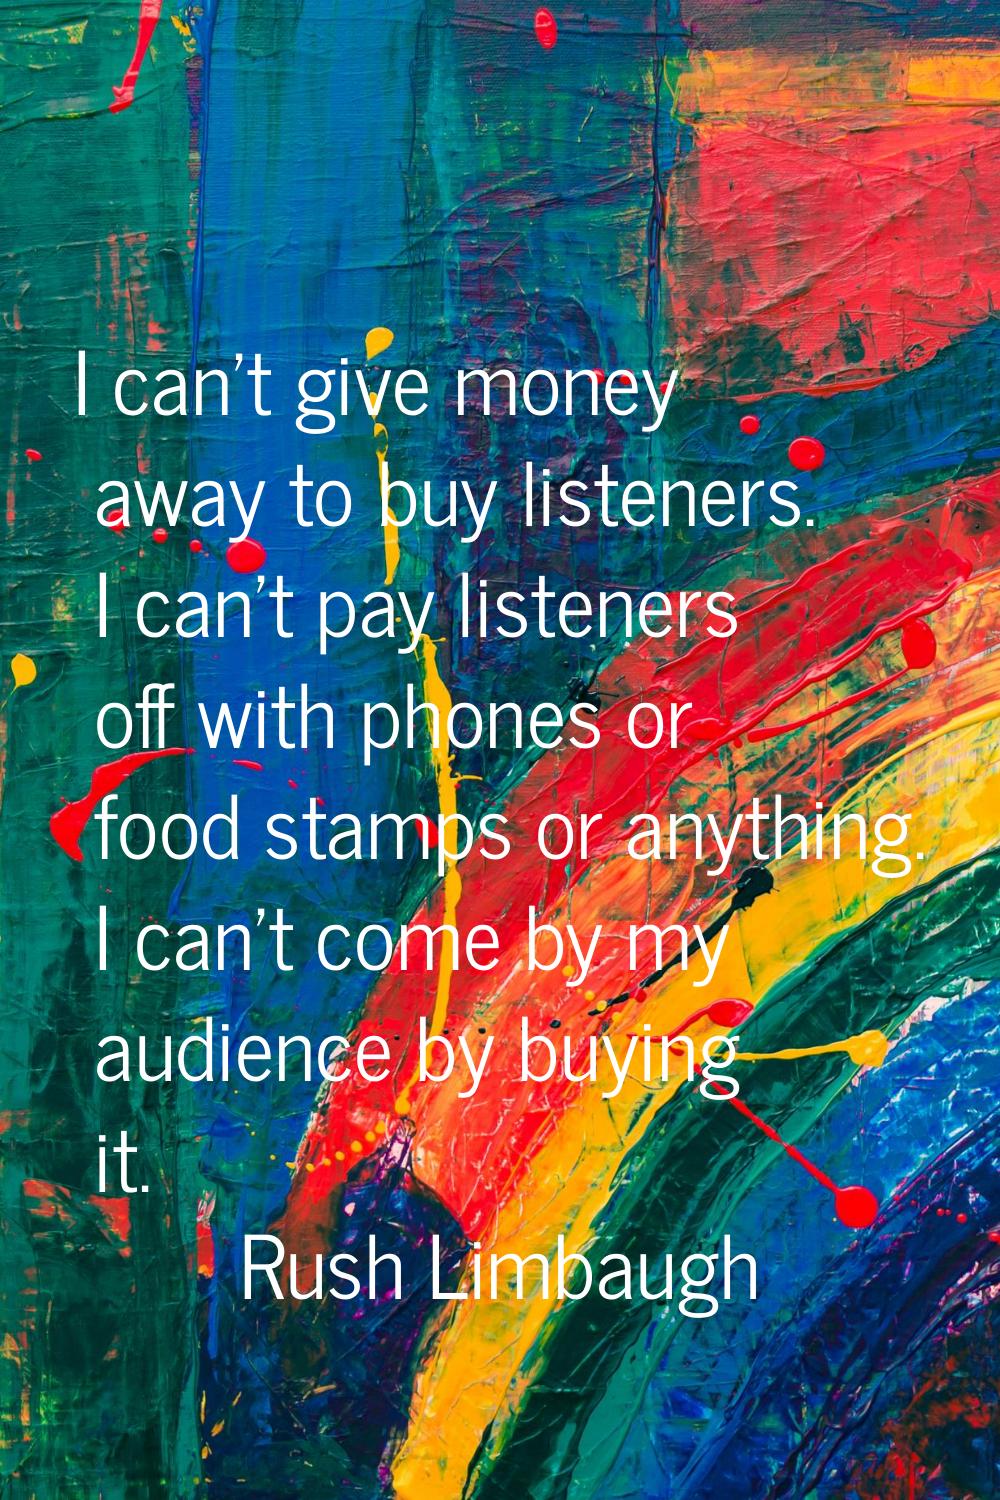 I can't give money away to buy listeners. I can't pay listeners off with phones or food stamps or a